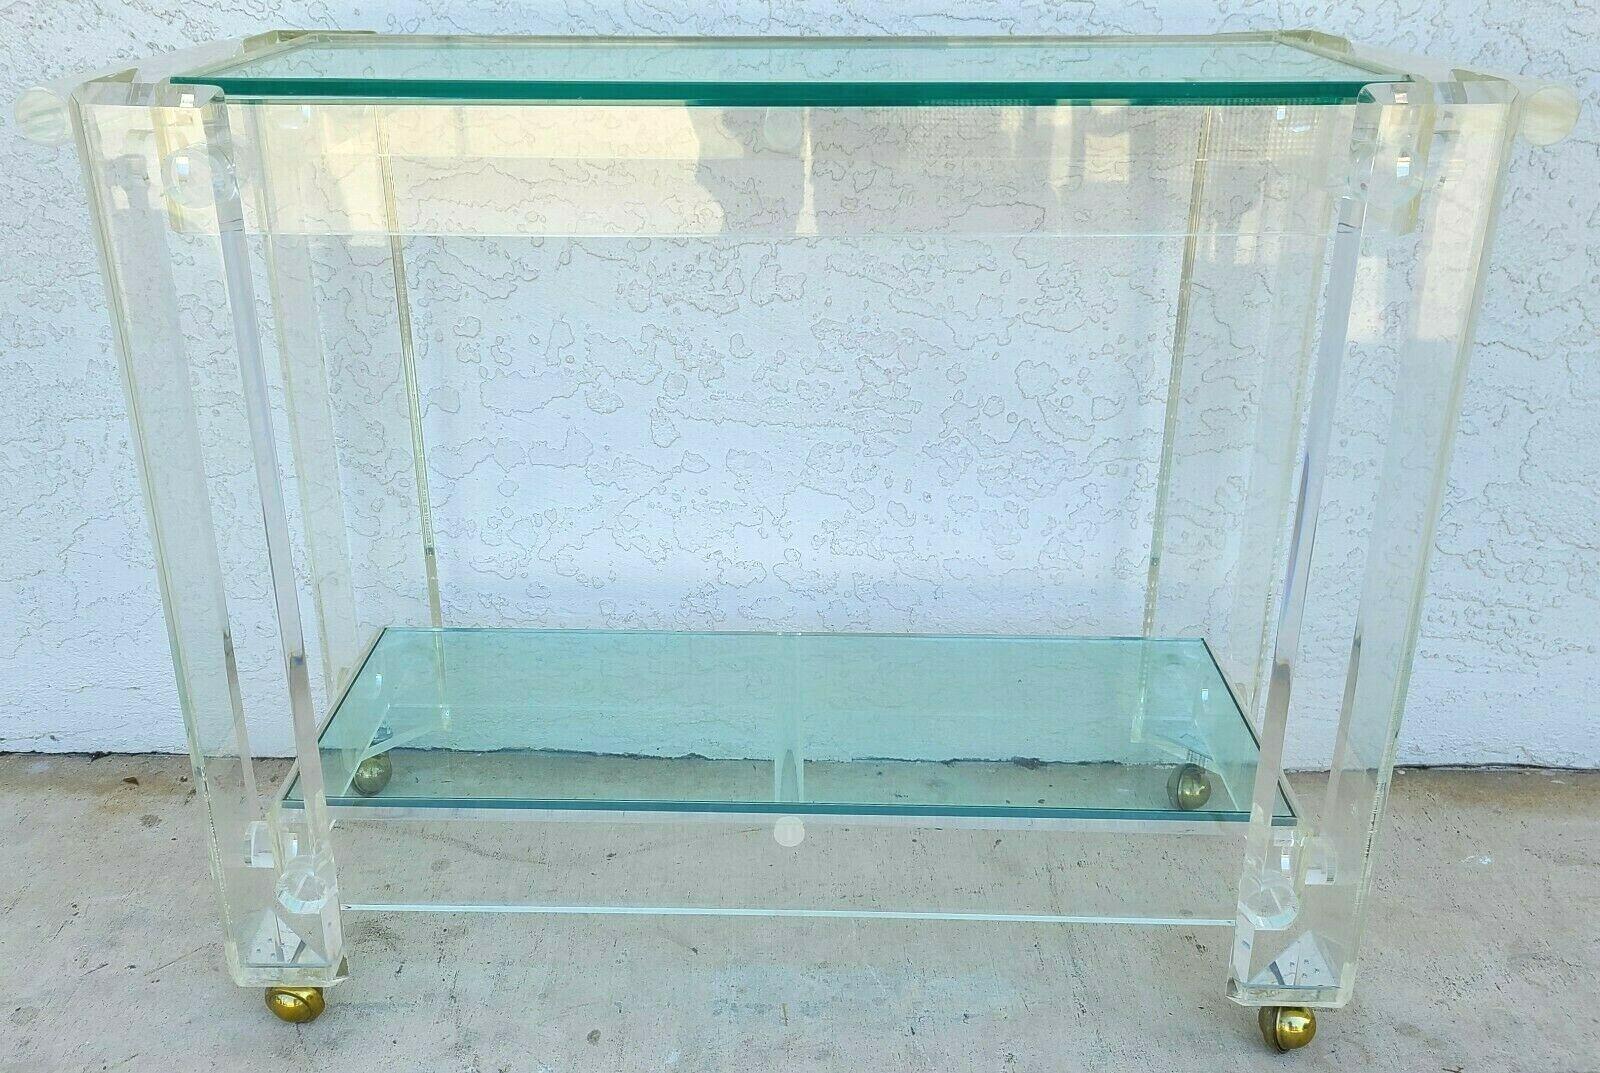 For FULL item description click on CONTINUE READING at the bottom of this page.

Offering one of our recent Palm Beach Estate fine furniture acquisitions of a
Vintage 1970s Thick Lucite & glass rolling bar serving cart with vintage shepard